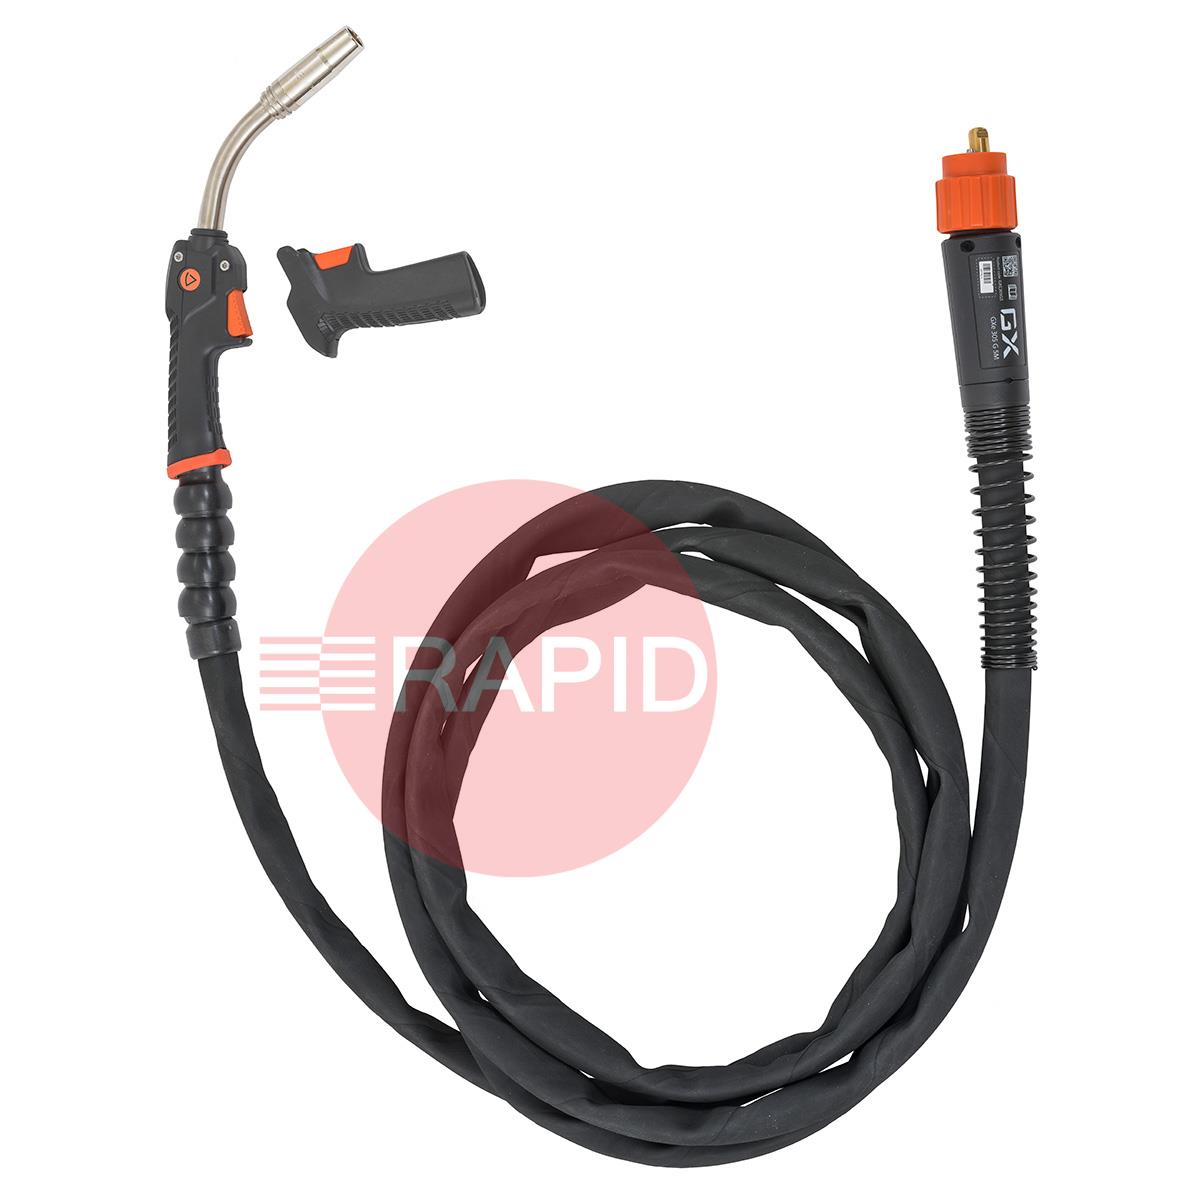 GXE305G5  Kemppi Flexlite GXe K5 305G Air Cooled 300A MIG Torch, w/ Euro Connection - 5m